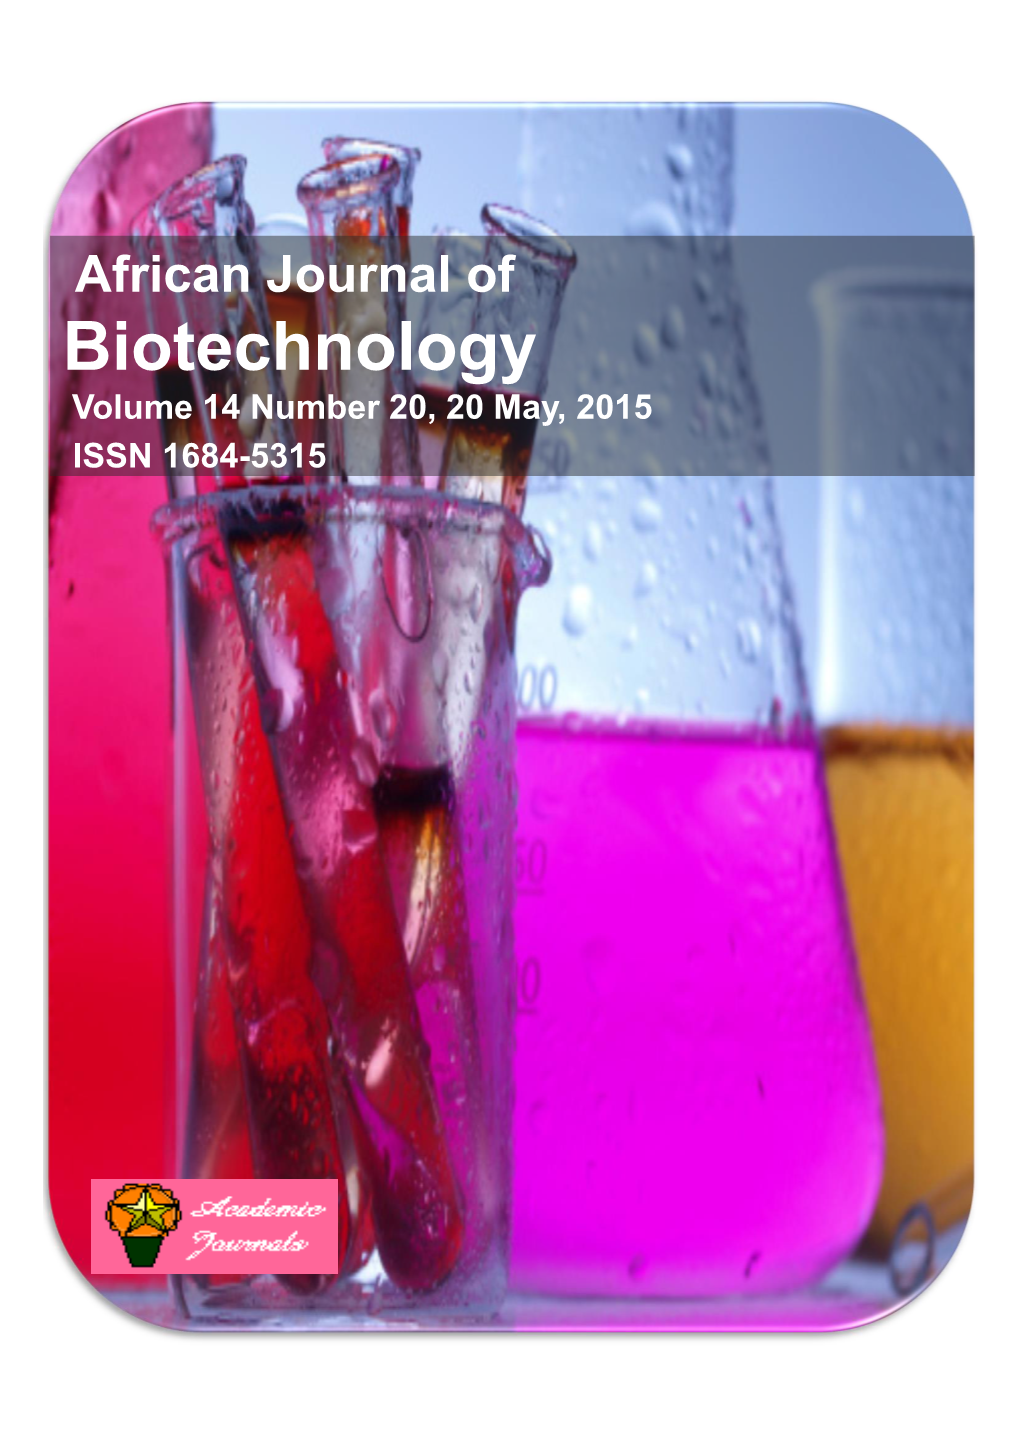 Biotechnology Volume 14 Number 20, 20 May, 2015 ISSN 1684-5315